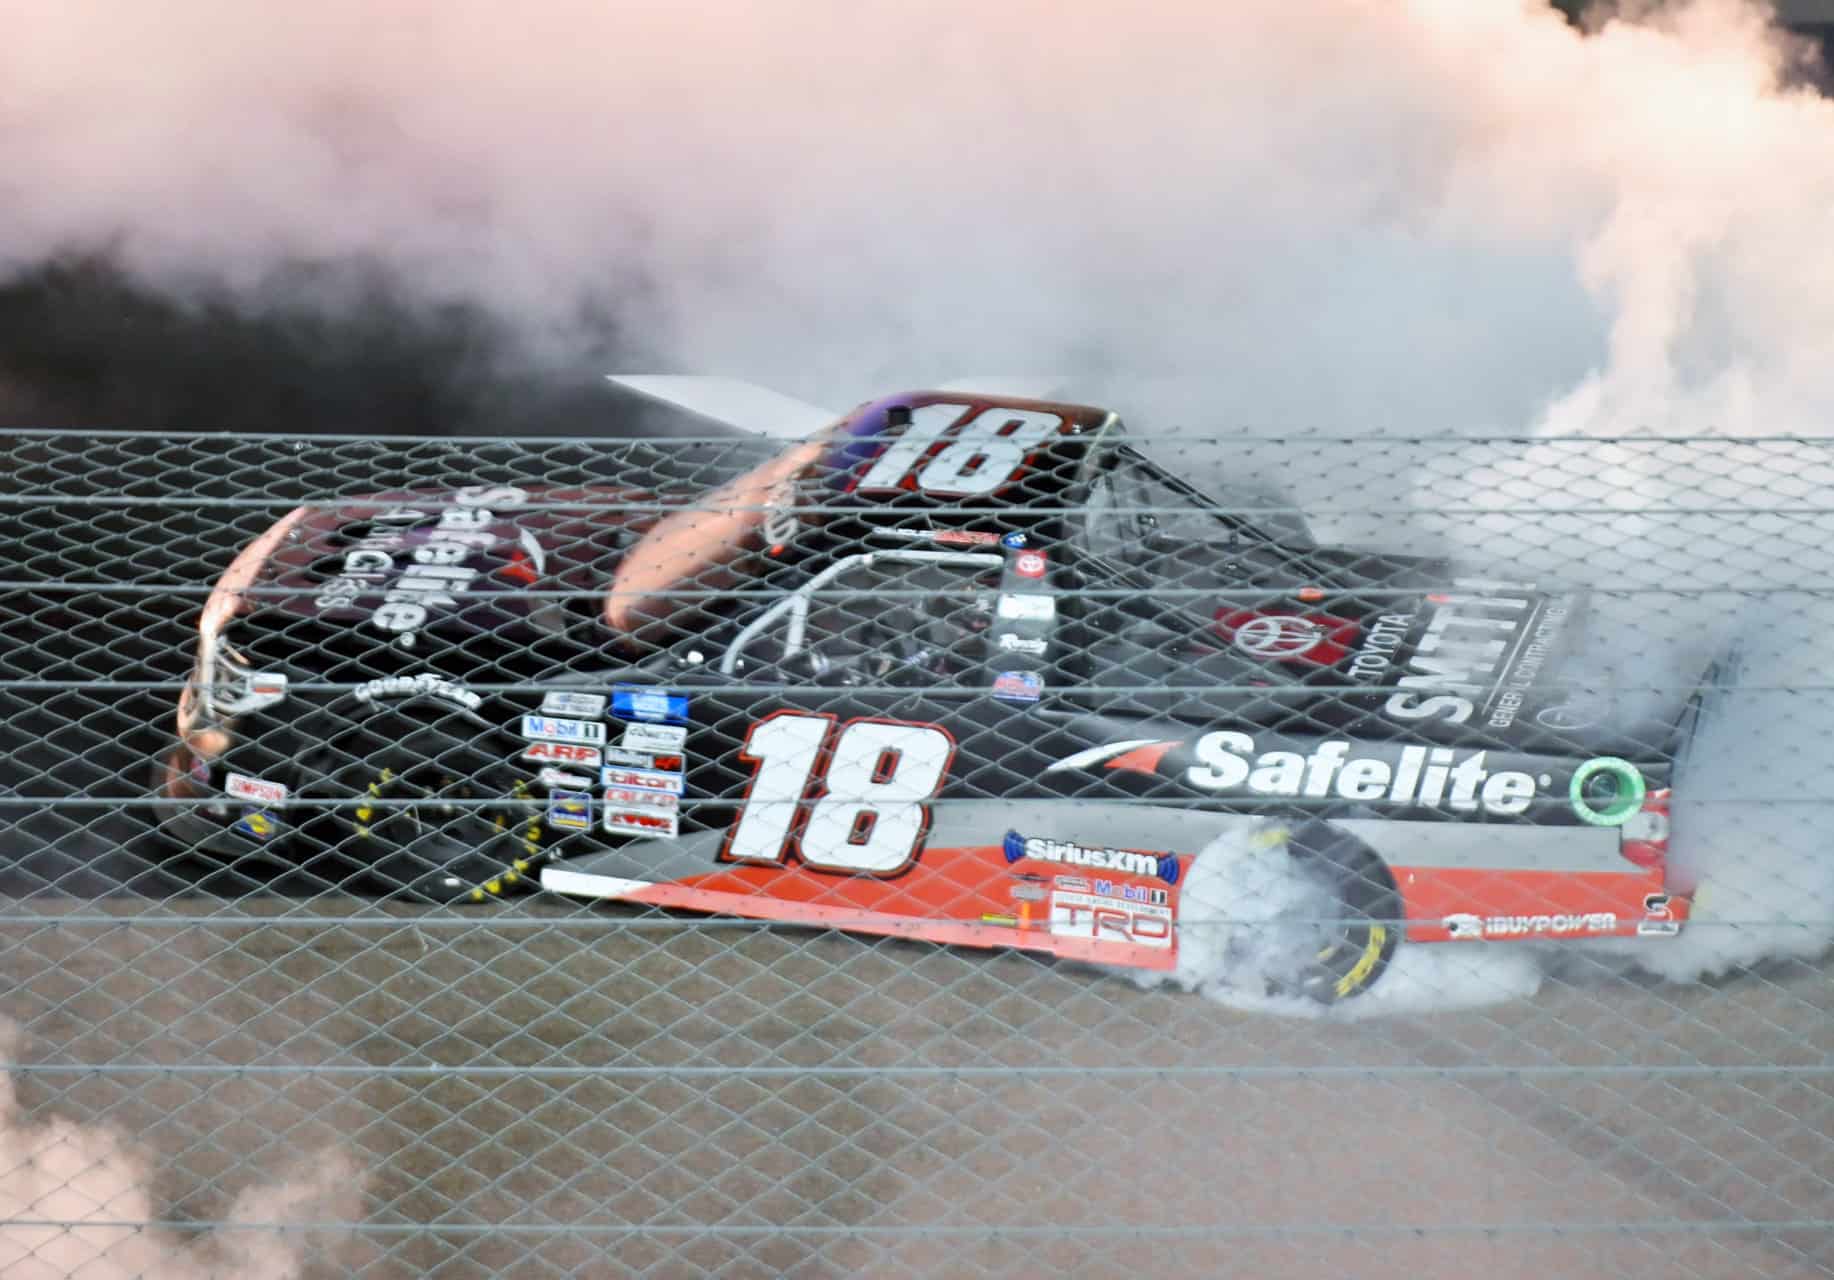 Chandler Smith burns down the tries after winning the truck series race at Phoenix Raceway. Photo by Jerry Jordan/Kickin' the Tires 